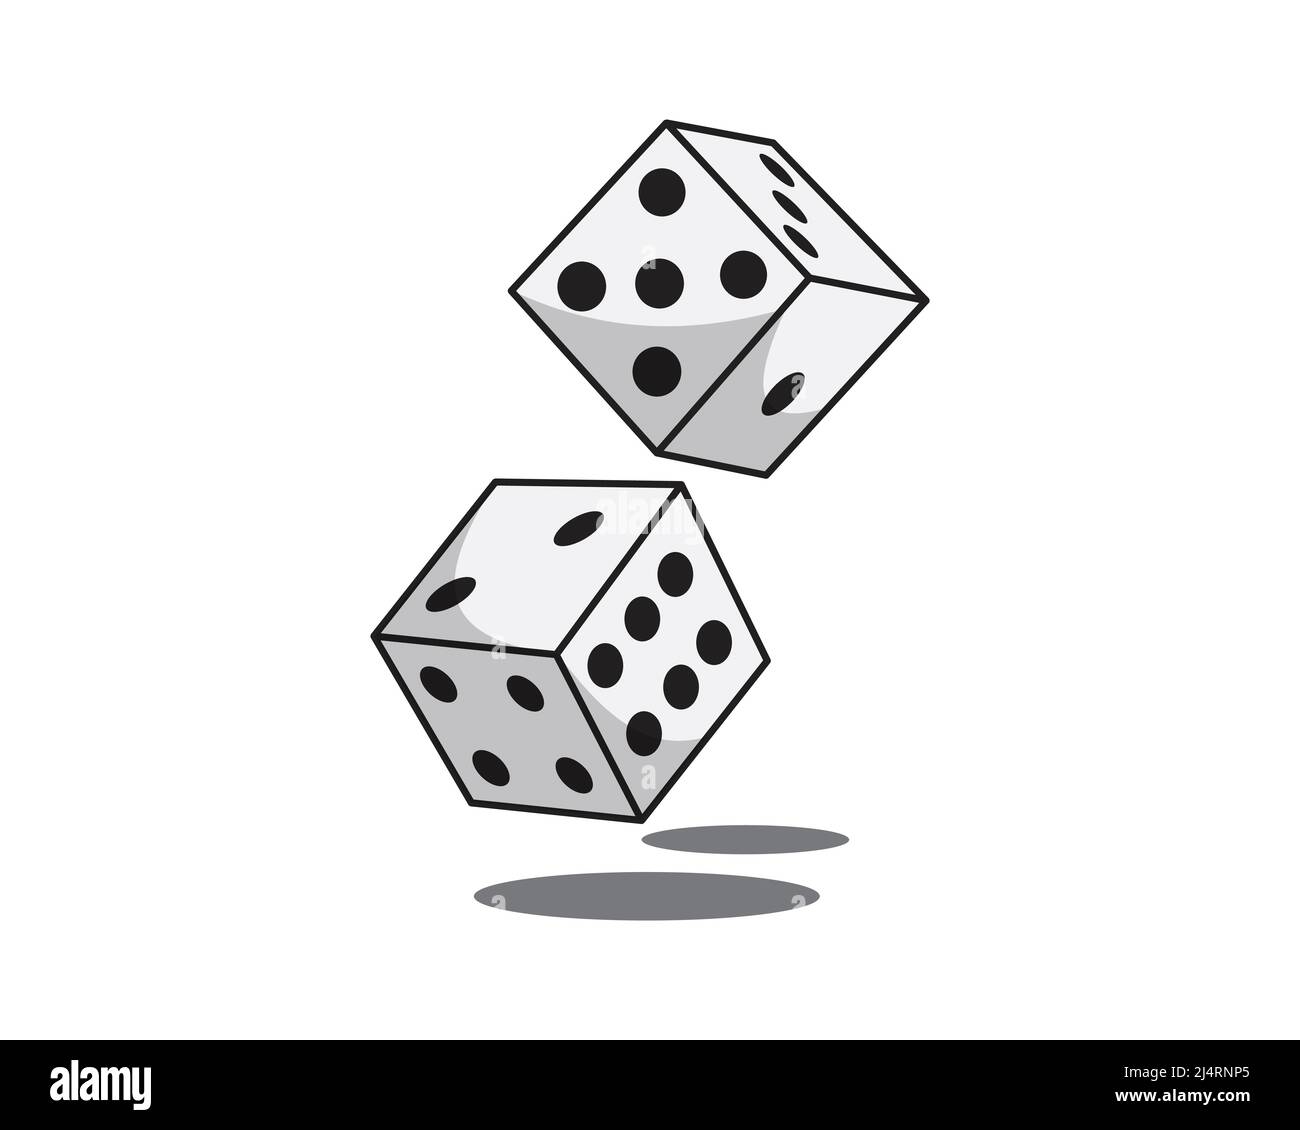 Dice Stock Vector Images - Alamy